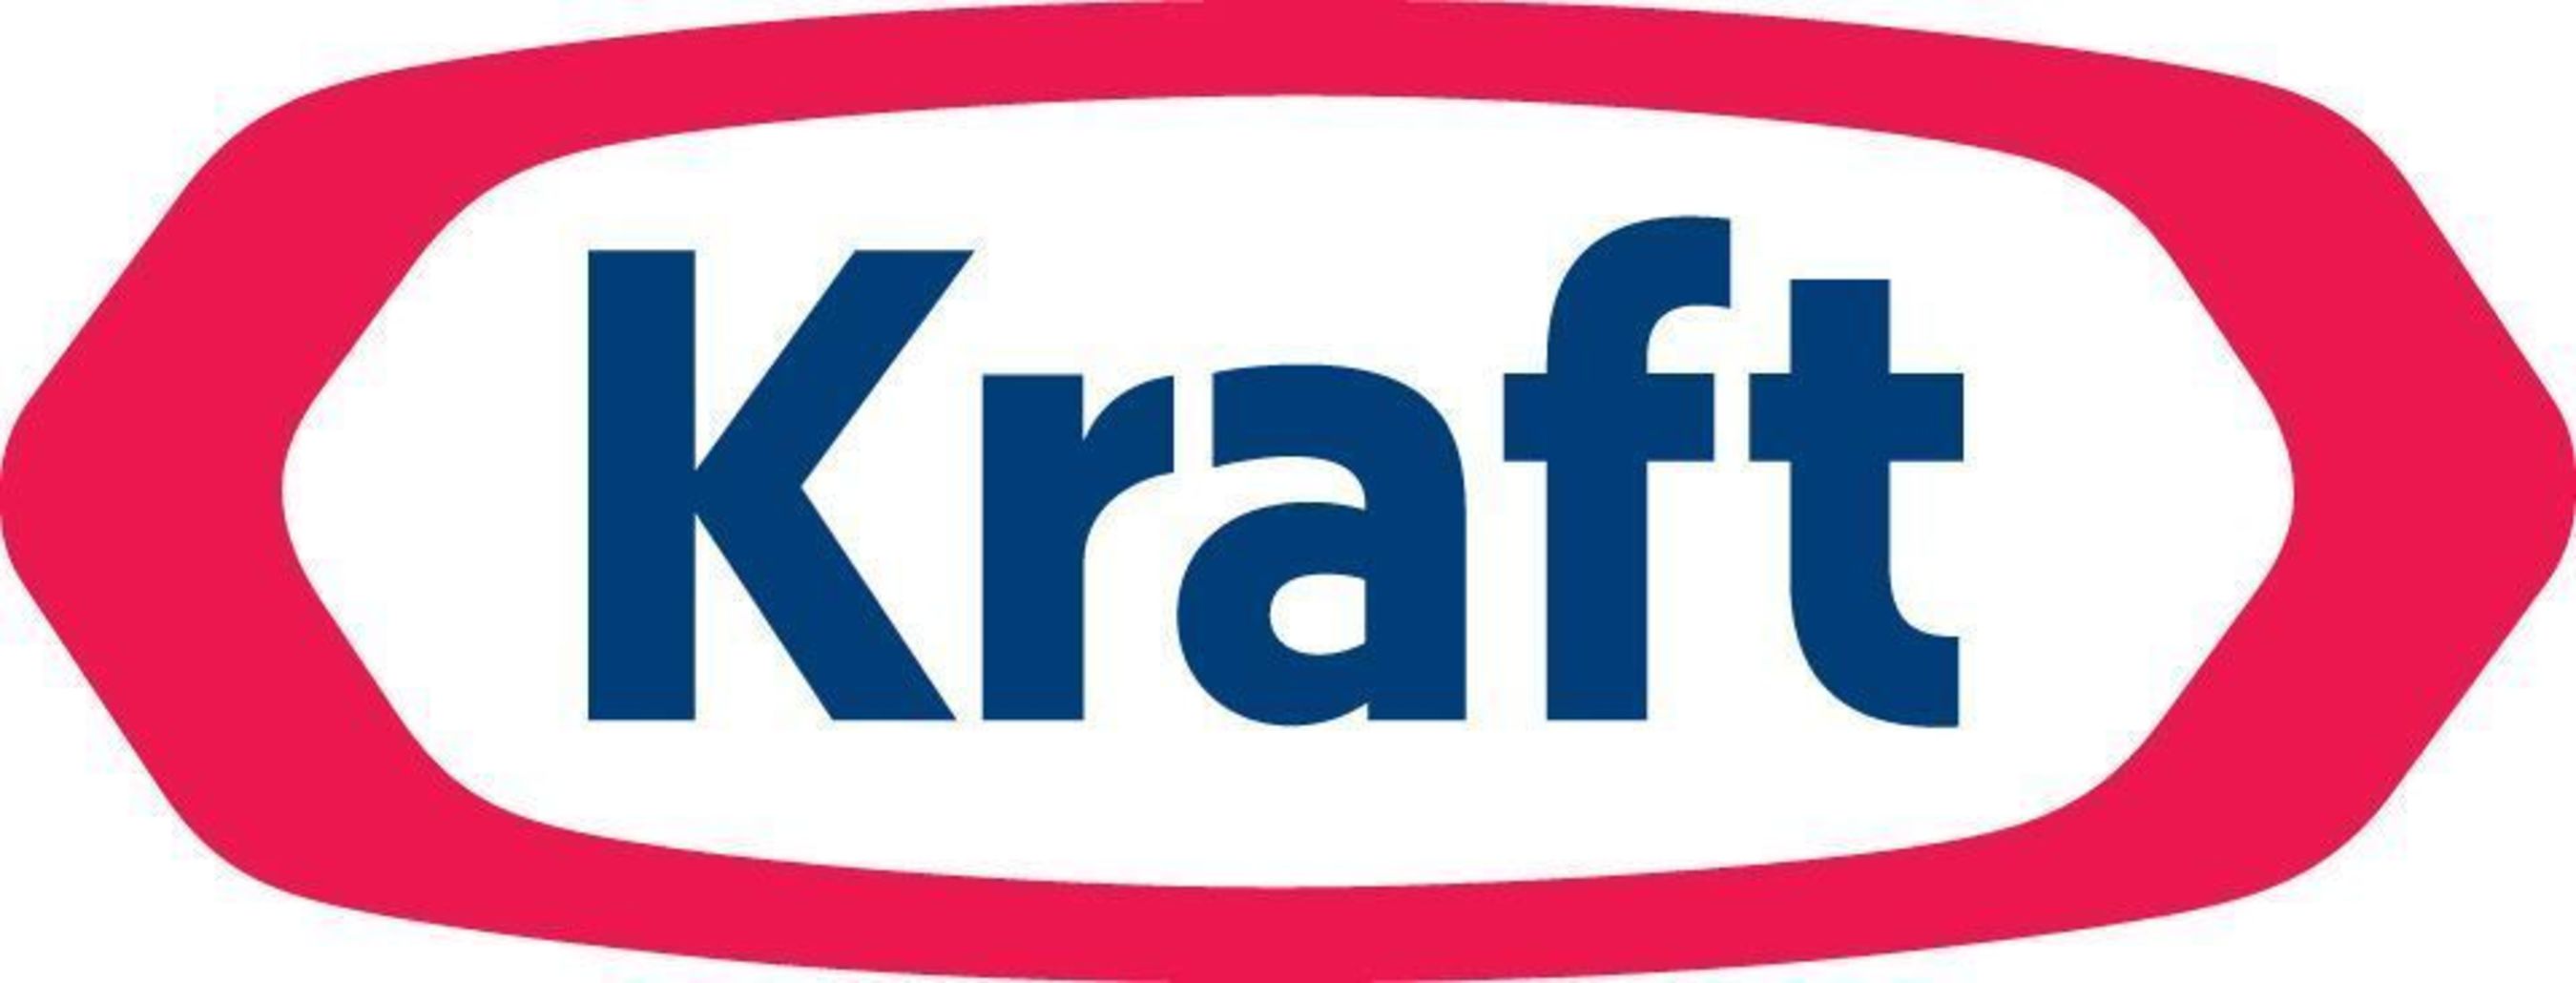 AMERICA'S FAVORITE CHEESE BRANDS COMPETE ON PAR WITH ARTISANAL BRANDS FROM AROUND THE WORLD (PRNewsFoto/Kraft Foods Group, Inc.)